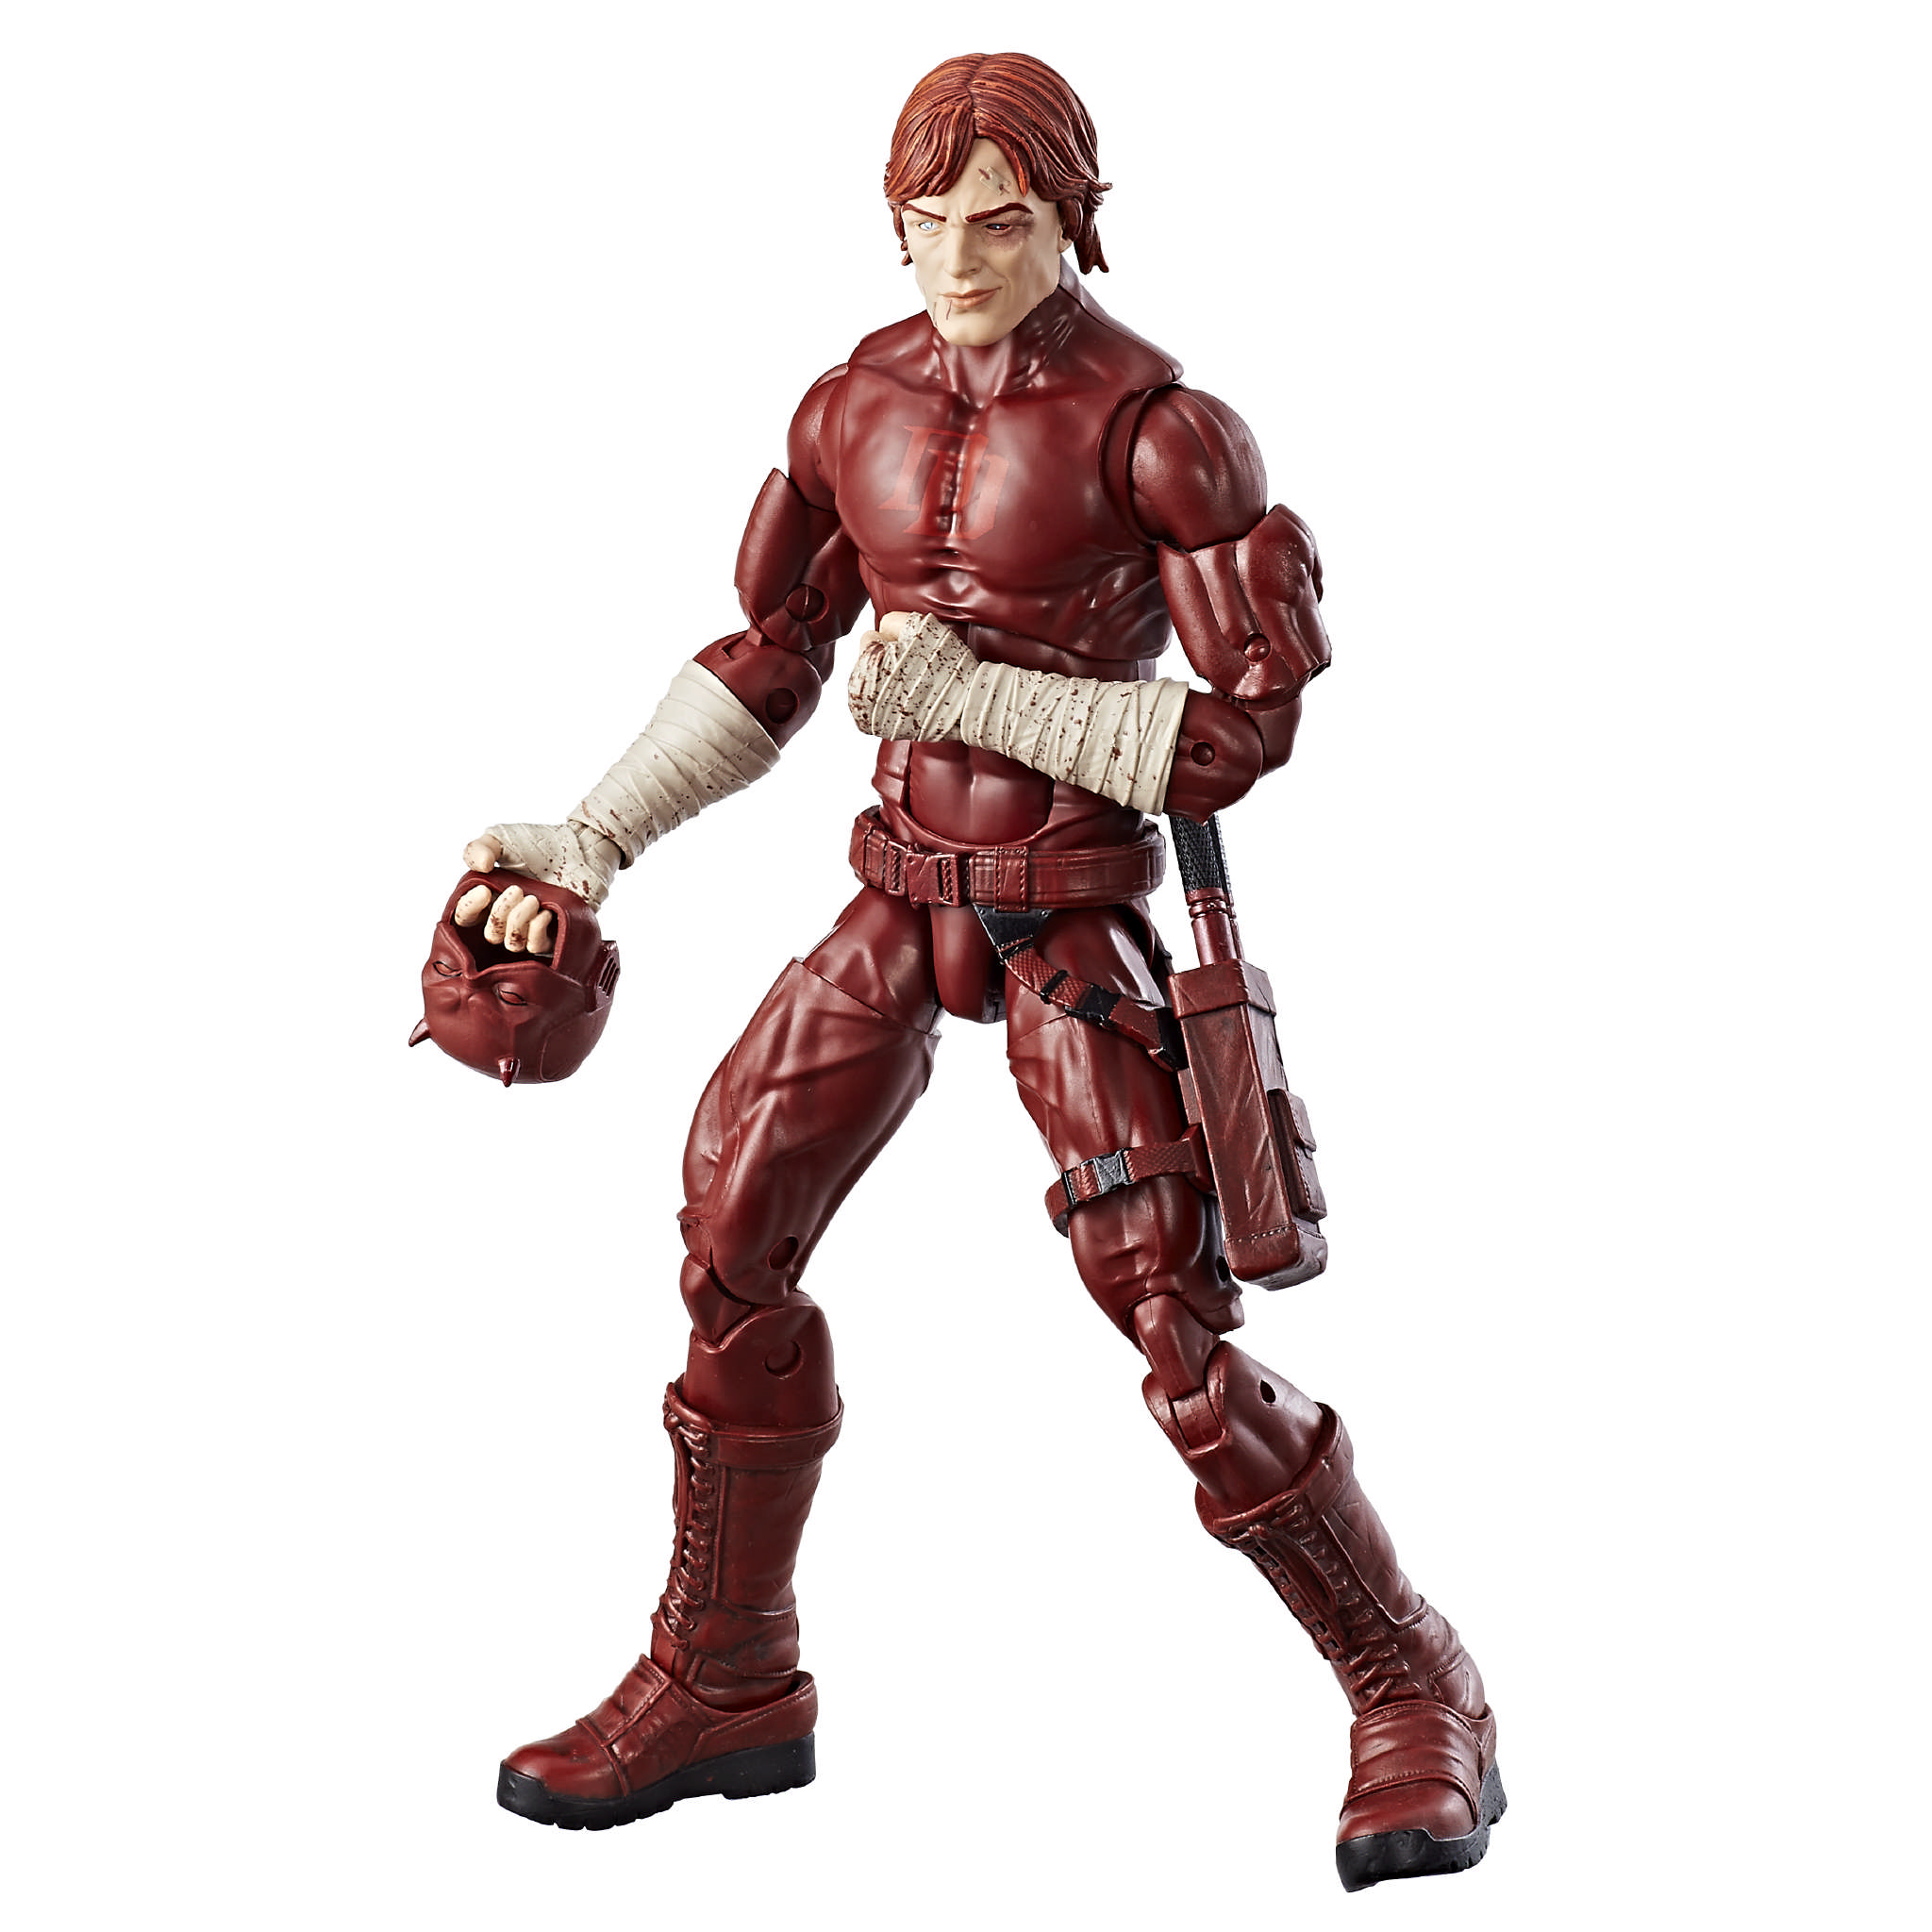 Marvel Legends 12Inch Daredevil Action Figure by Hasbro